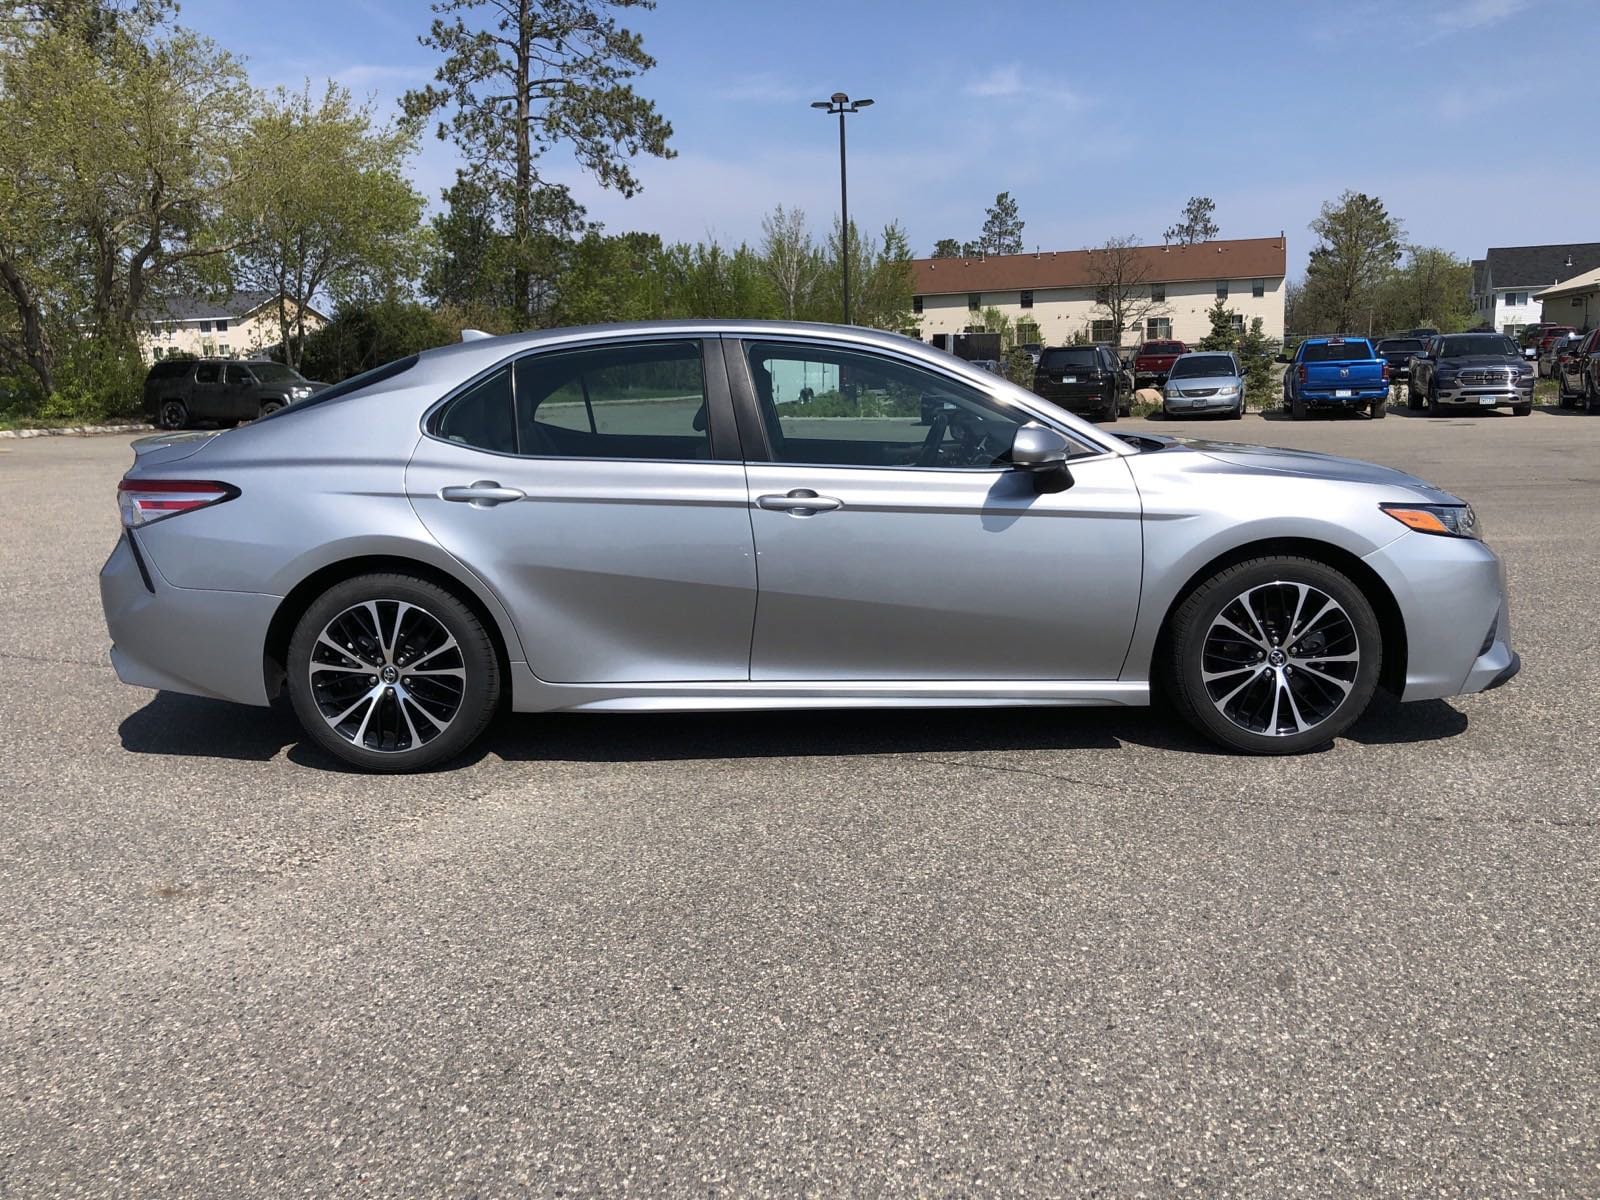 Used 2020 Toyota Camry SE with VIN 4T1G11AK8LU907749 for sale in Bemidji, Minnesota